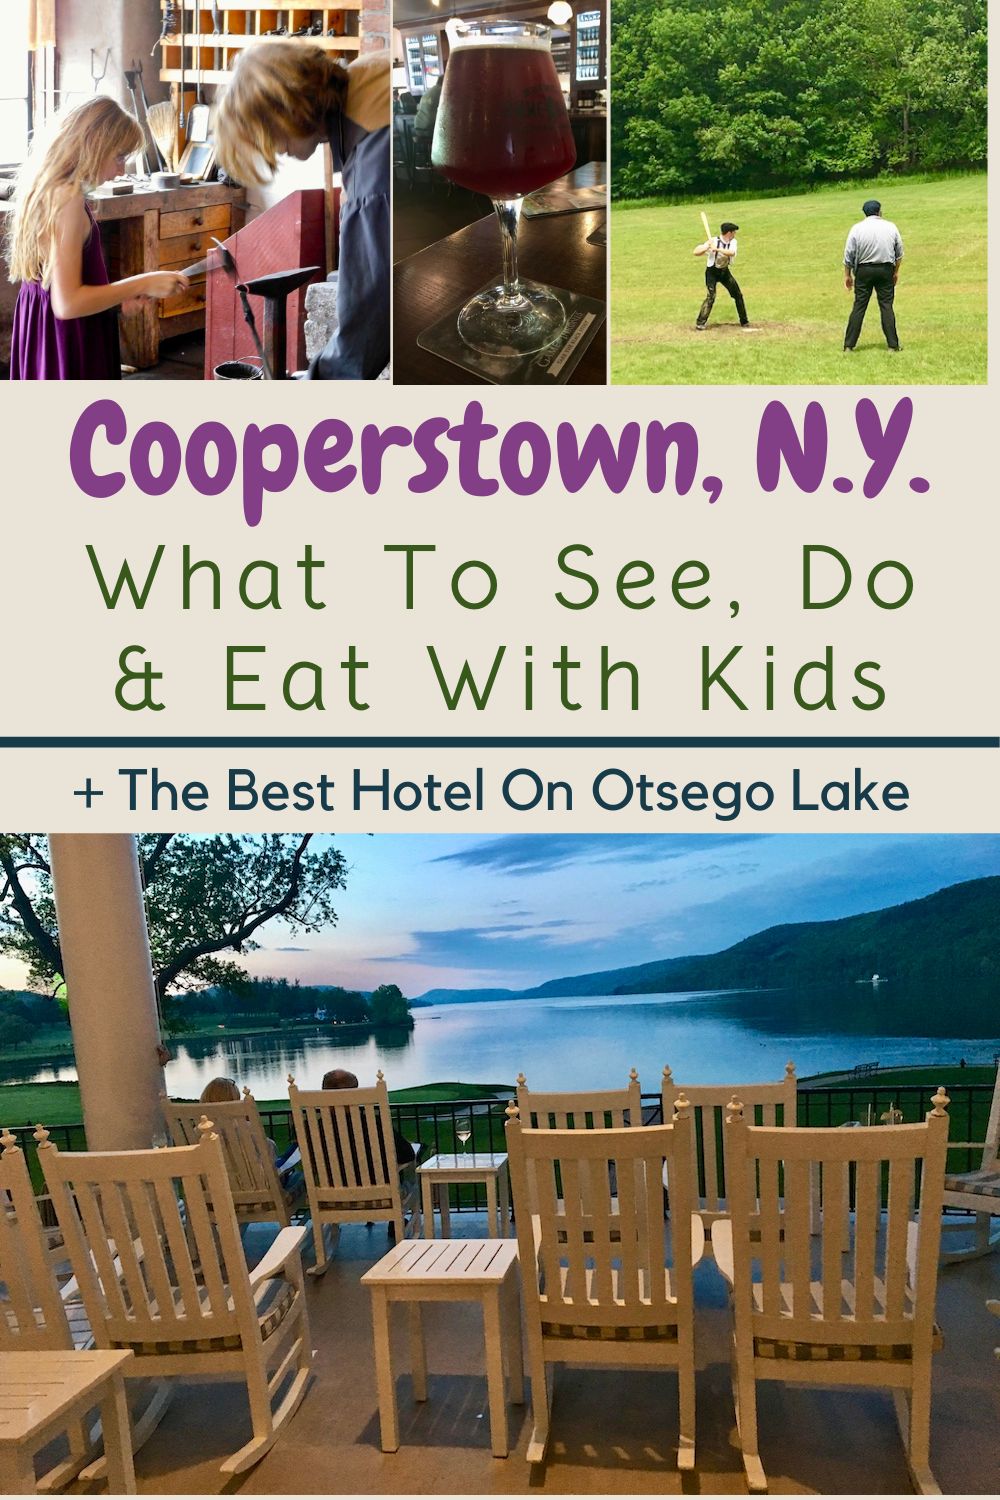 cooperstown is a fun destination for a weekend getaway with kids in the summer and fall. see foliage, visit a farm museum, drink local beer, watch baseball, and enjou scenic otsego lake. here the highlights, plus restaurants, breweries and hotels for families. 